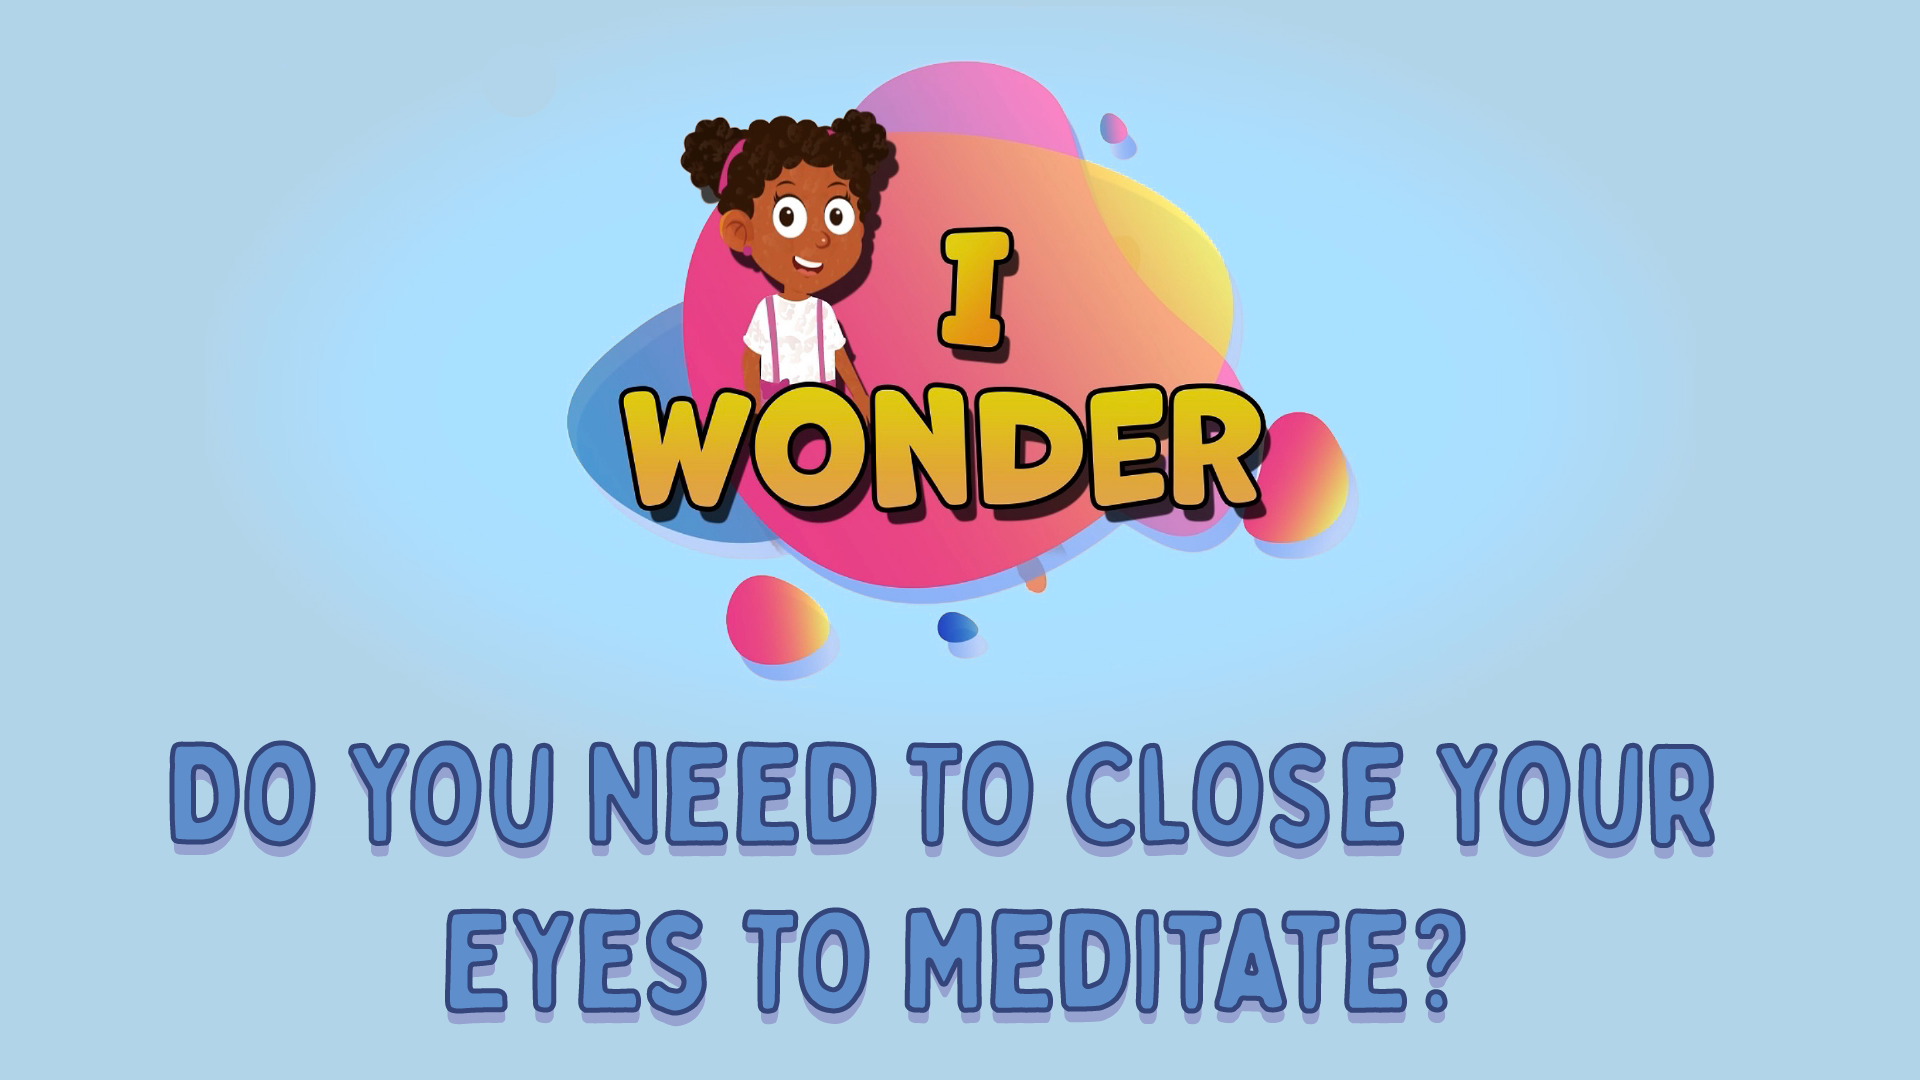 Do You Need To Close Your Eyes To Meditate?